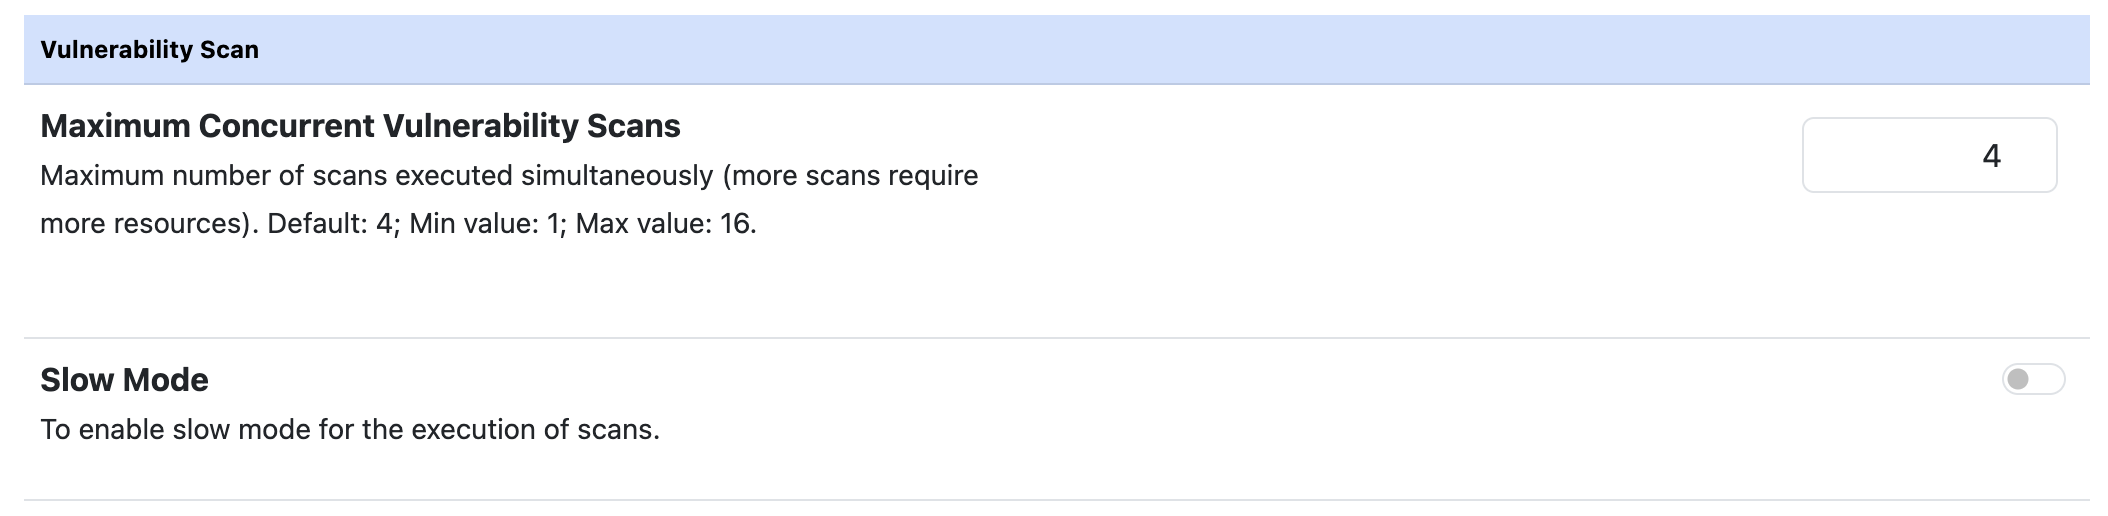 Vulnerability Scan Preferences